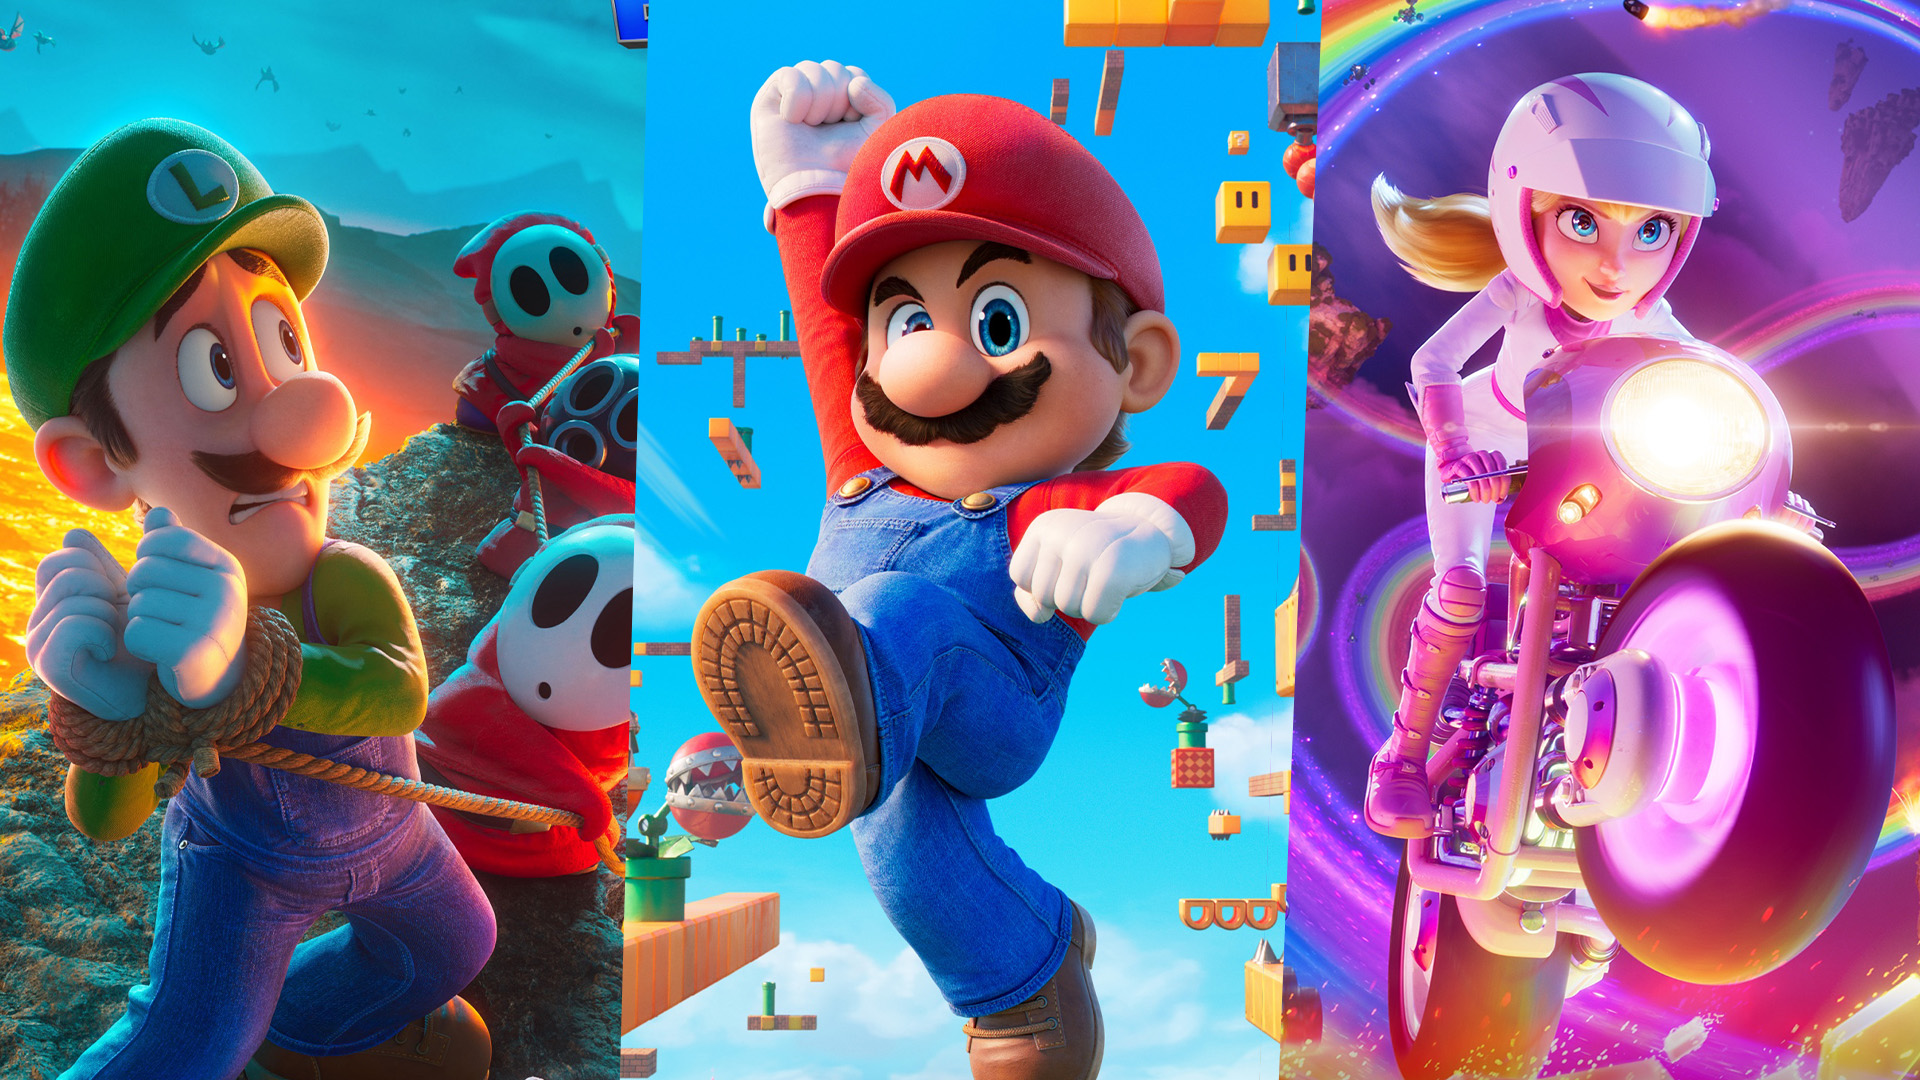 New posters for The Super Mario Bros. Movie are released